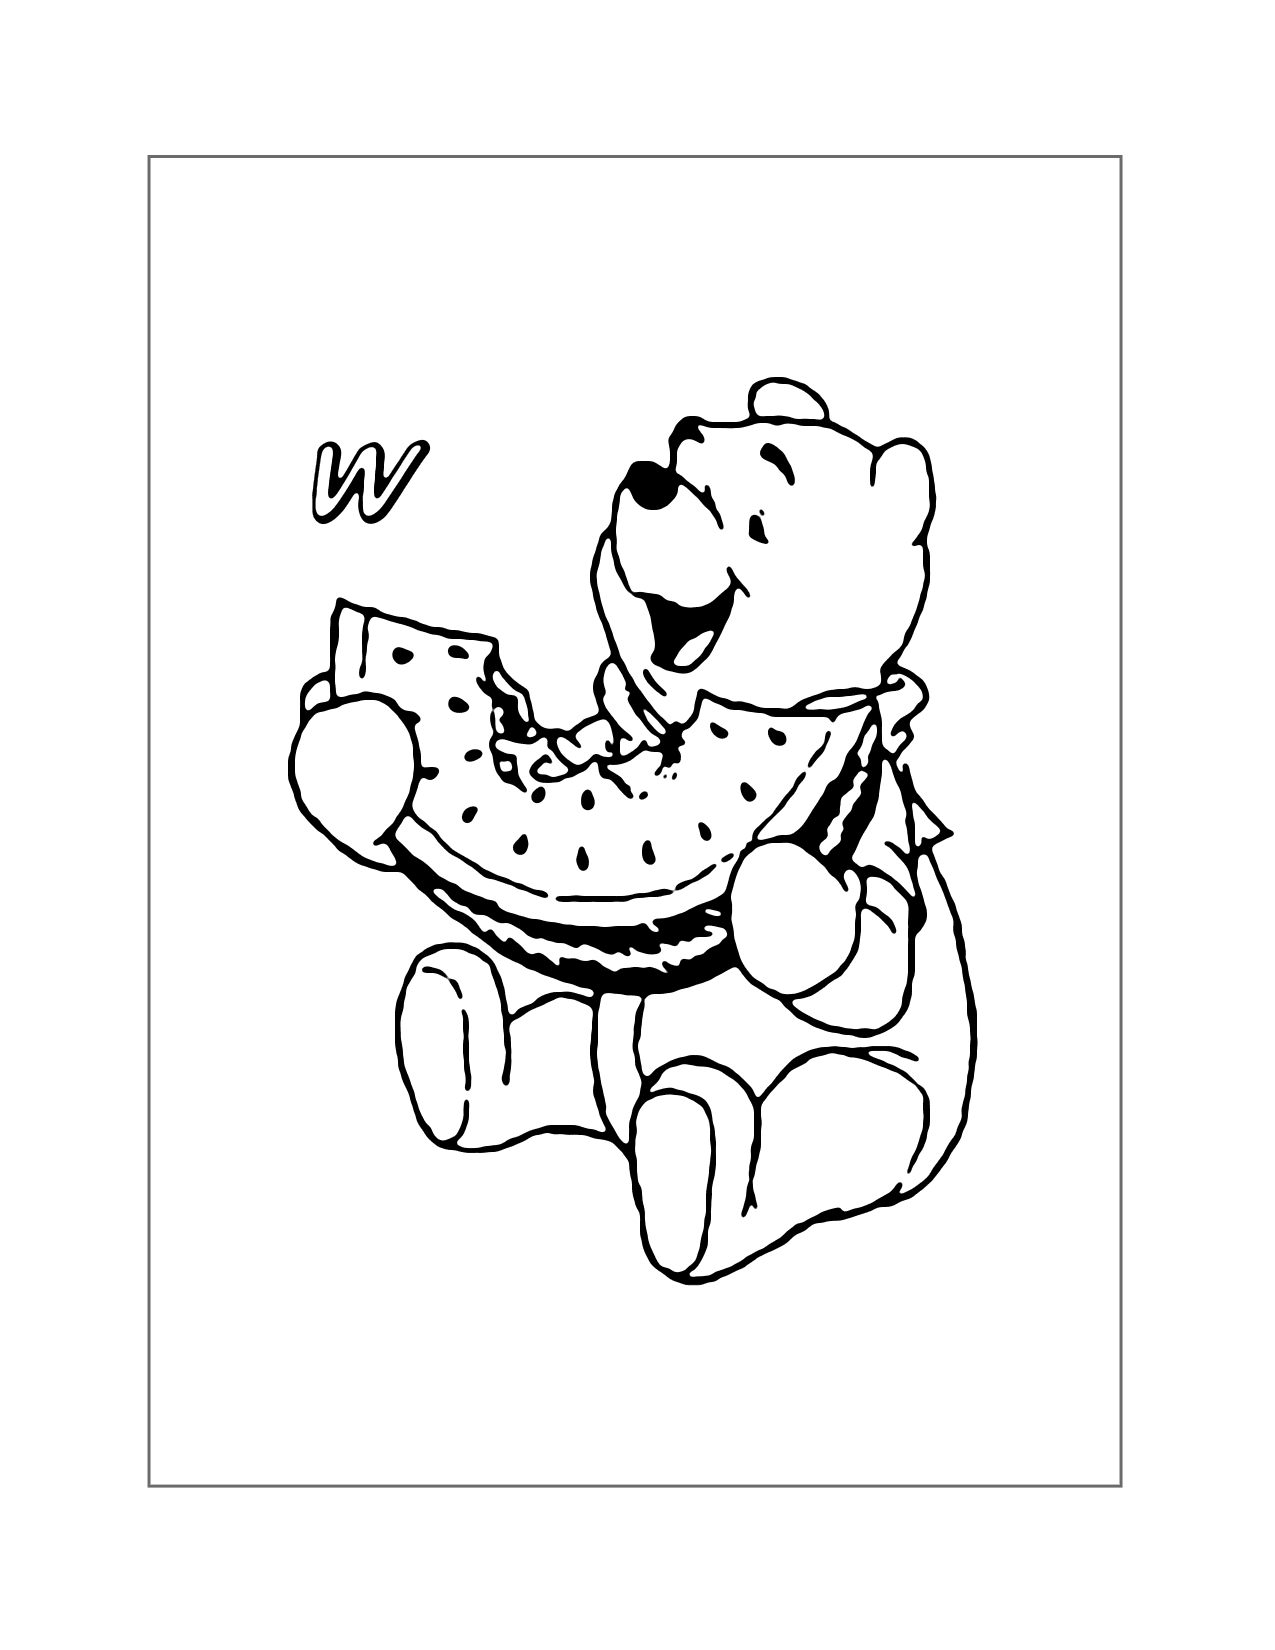 Pooh Bear Eating Watermelon W Coloring Page